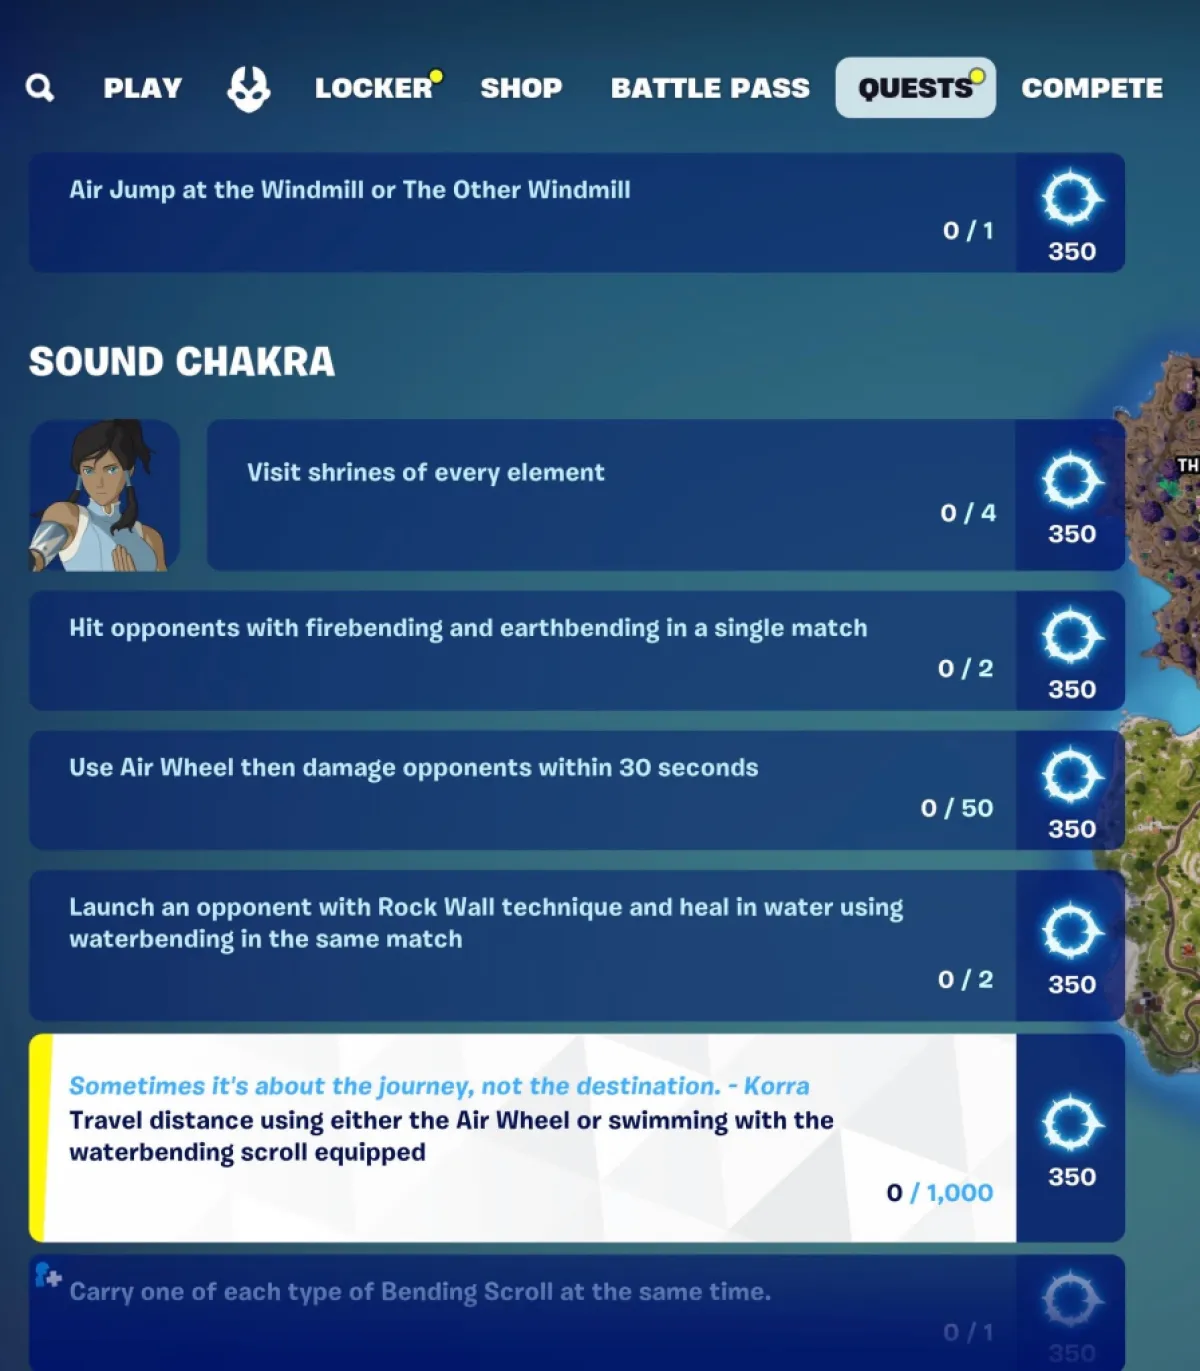 All Sound Chakra Challenges in Fortnite.